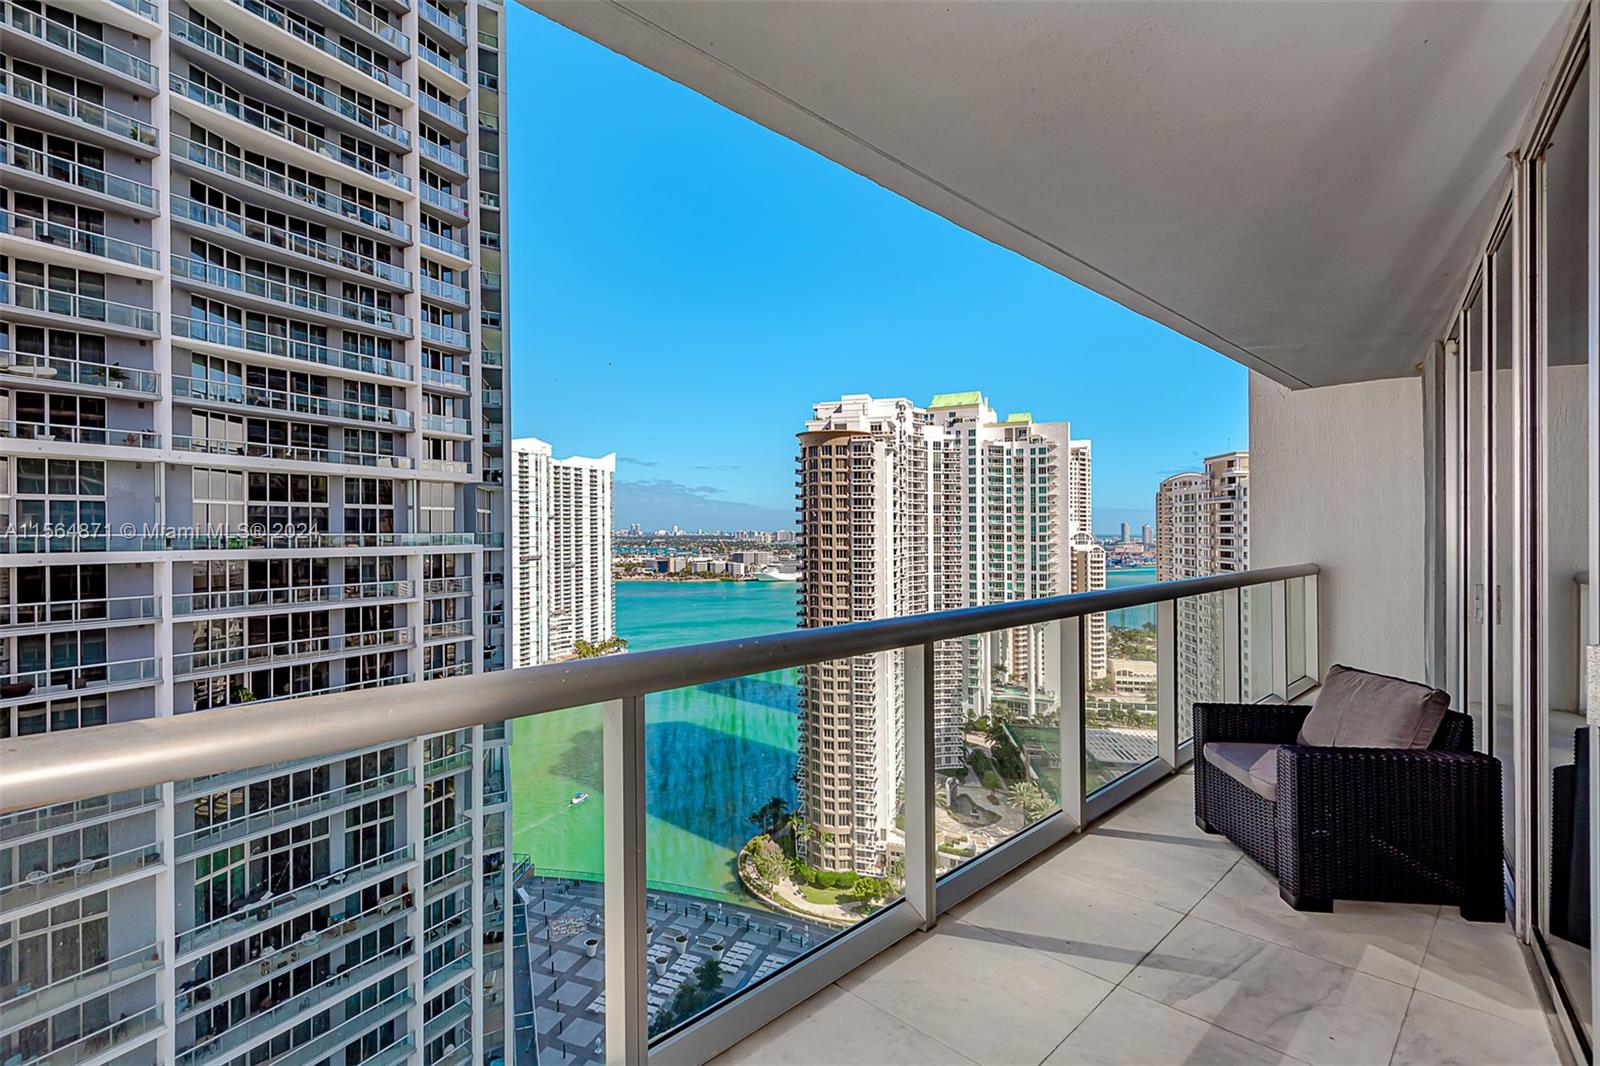 Beautiful corner unit with spectacular Bay and City views at the most desirable building in Brickell. Large 2bed/2baths, porcelain floors, walk-in closets. The unit is impeccable. Fully equipped kitchen, Italian designer furniture throughout. Great amenities including gym, pools, sauna and club house. Walking distance to restaurants, banking districts and fantastic shopping. Unit comes with 1 parking space, 1 valet. Basic cable and internet included. *Unit available May 8th.* **24 hours notice for showings **